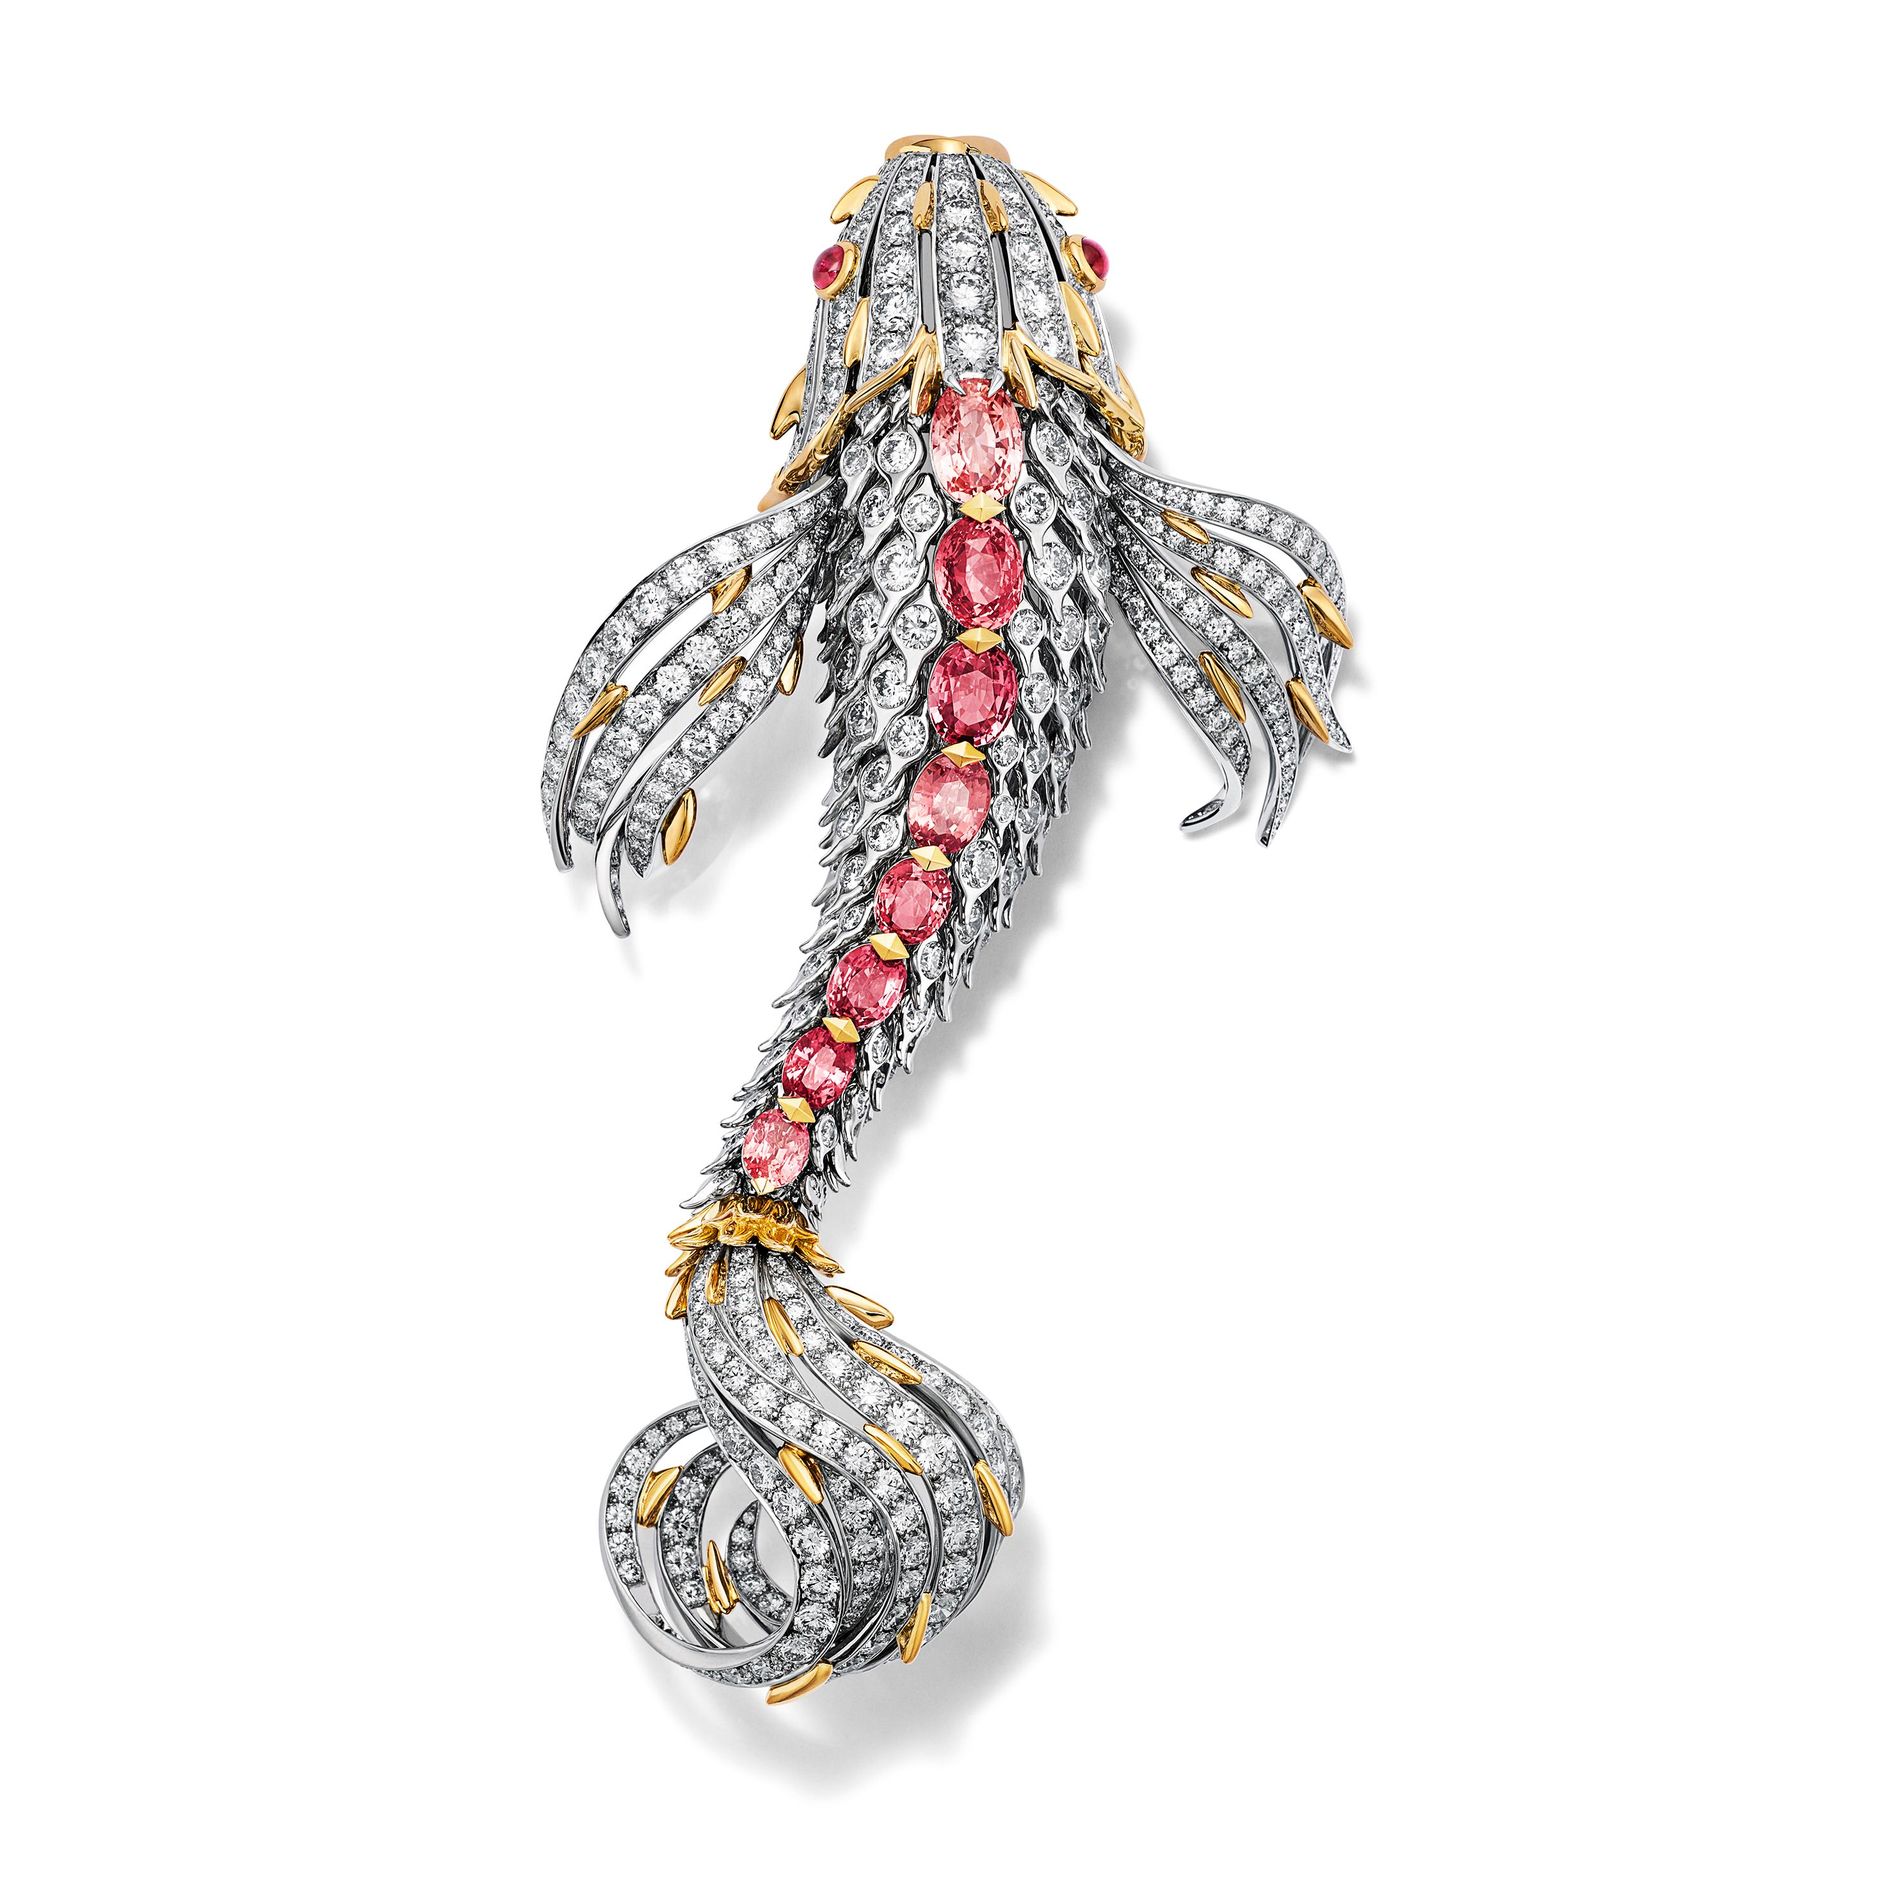 Tiffany & Co.'s latest High Jewellery collection dives into the aquatic  archives - Vogue Scandinavia